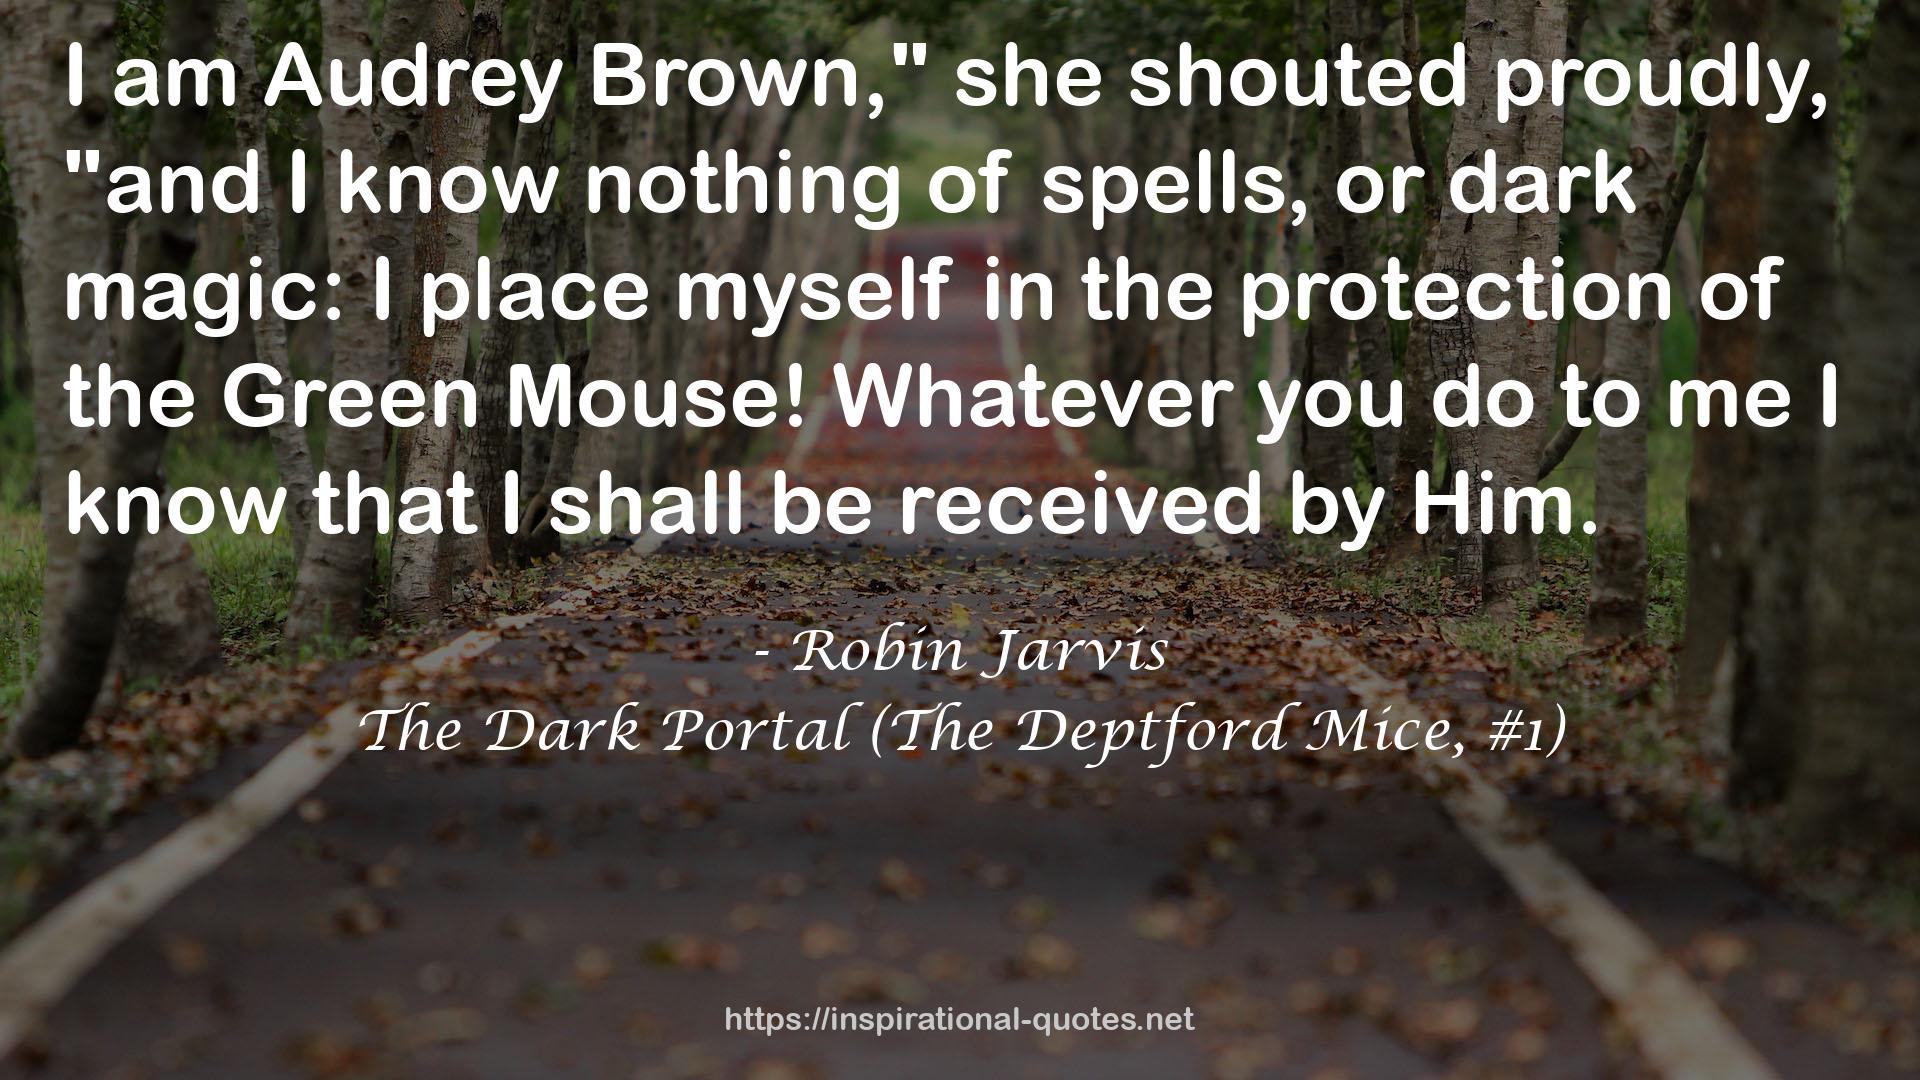 The Dark Portal (The Deptford Mice, #1) QUOTES